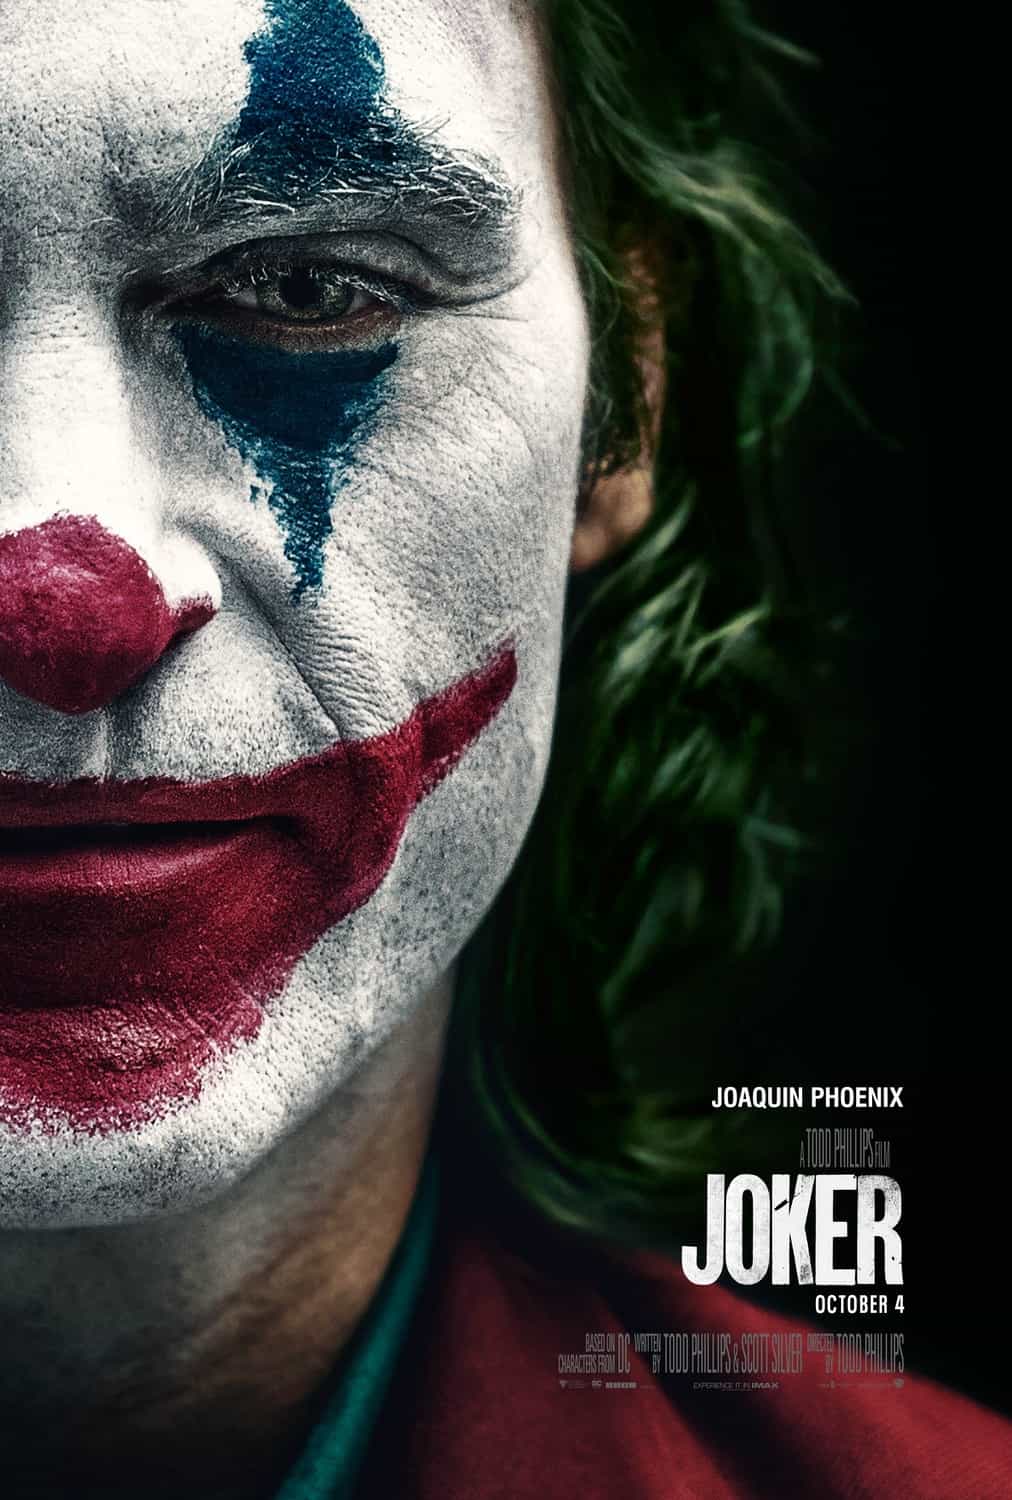 UK Box Office Analysis 18th - 20th October 2019:  Joker stays at the top despite challenges from 3 new entries on the top 5